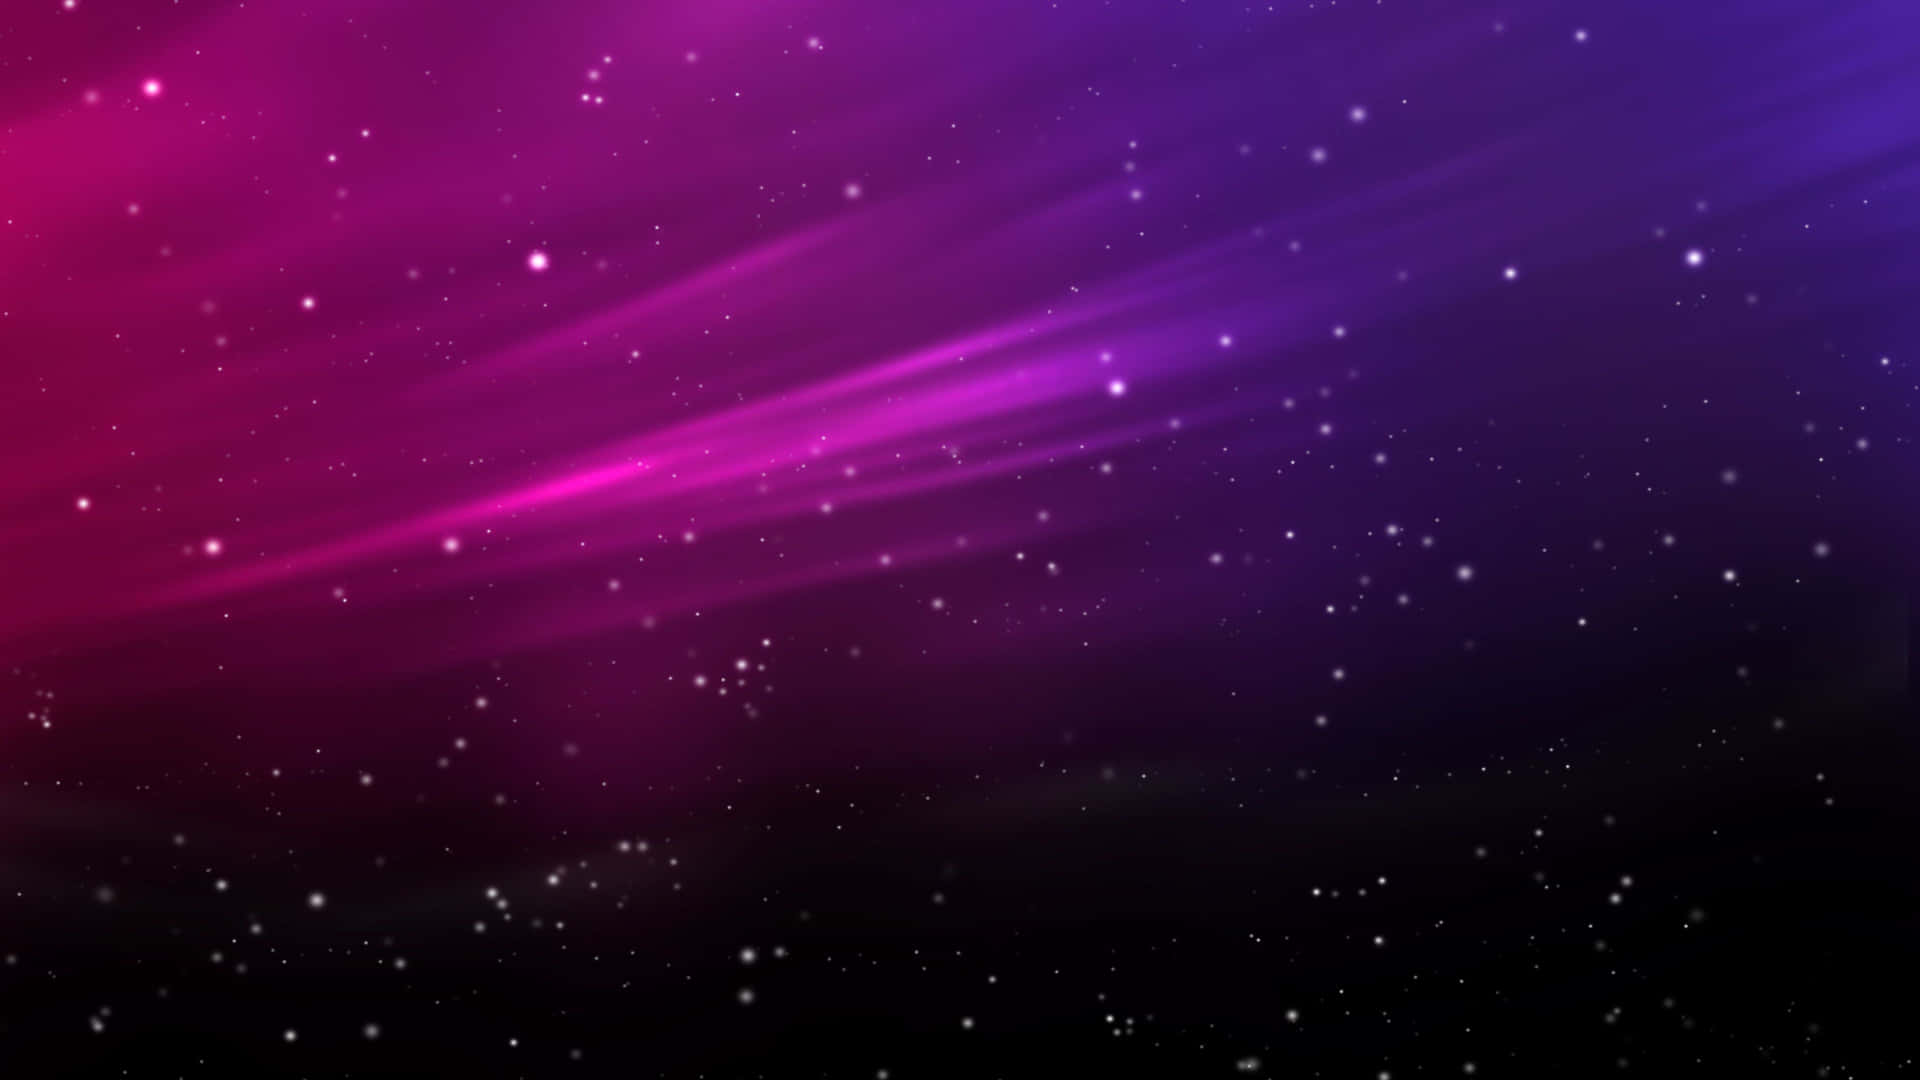 Colorful nebula in space Wallpaper